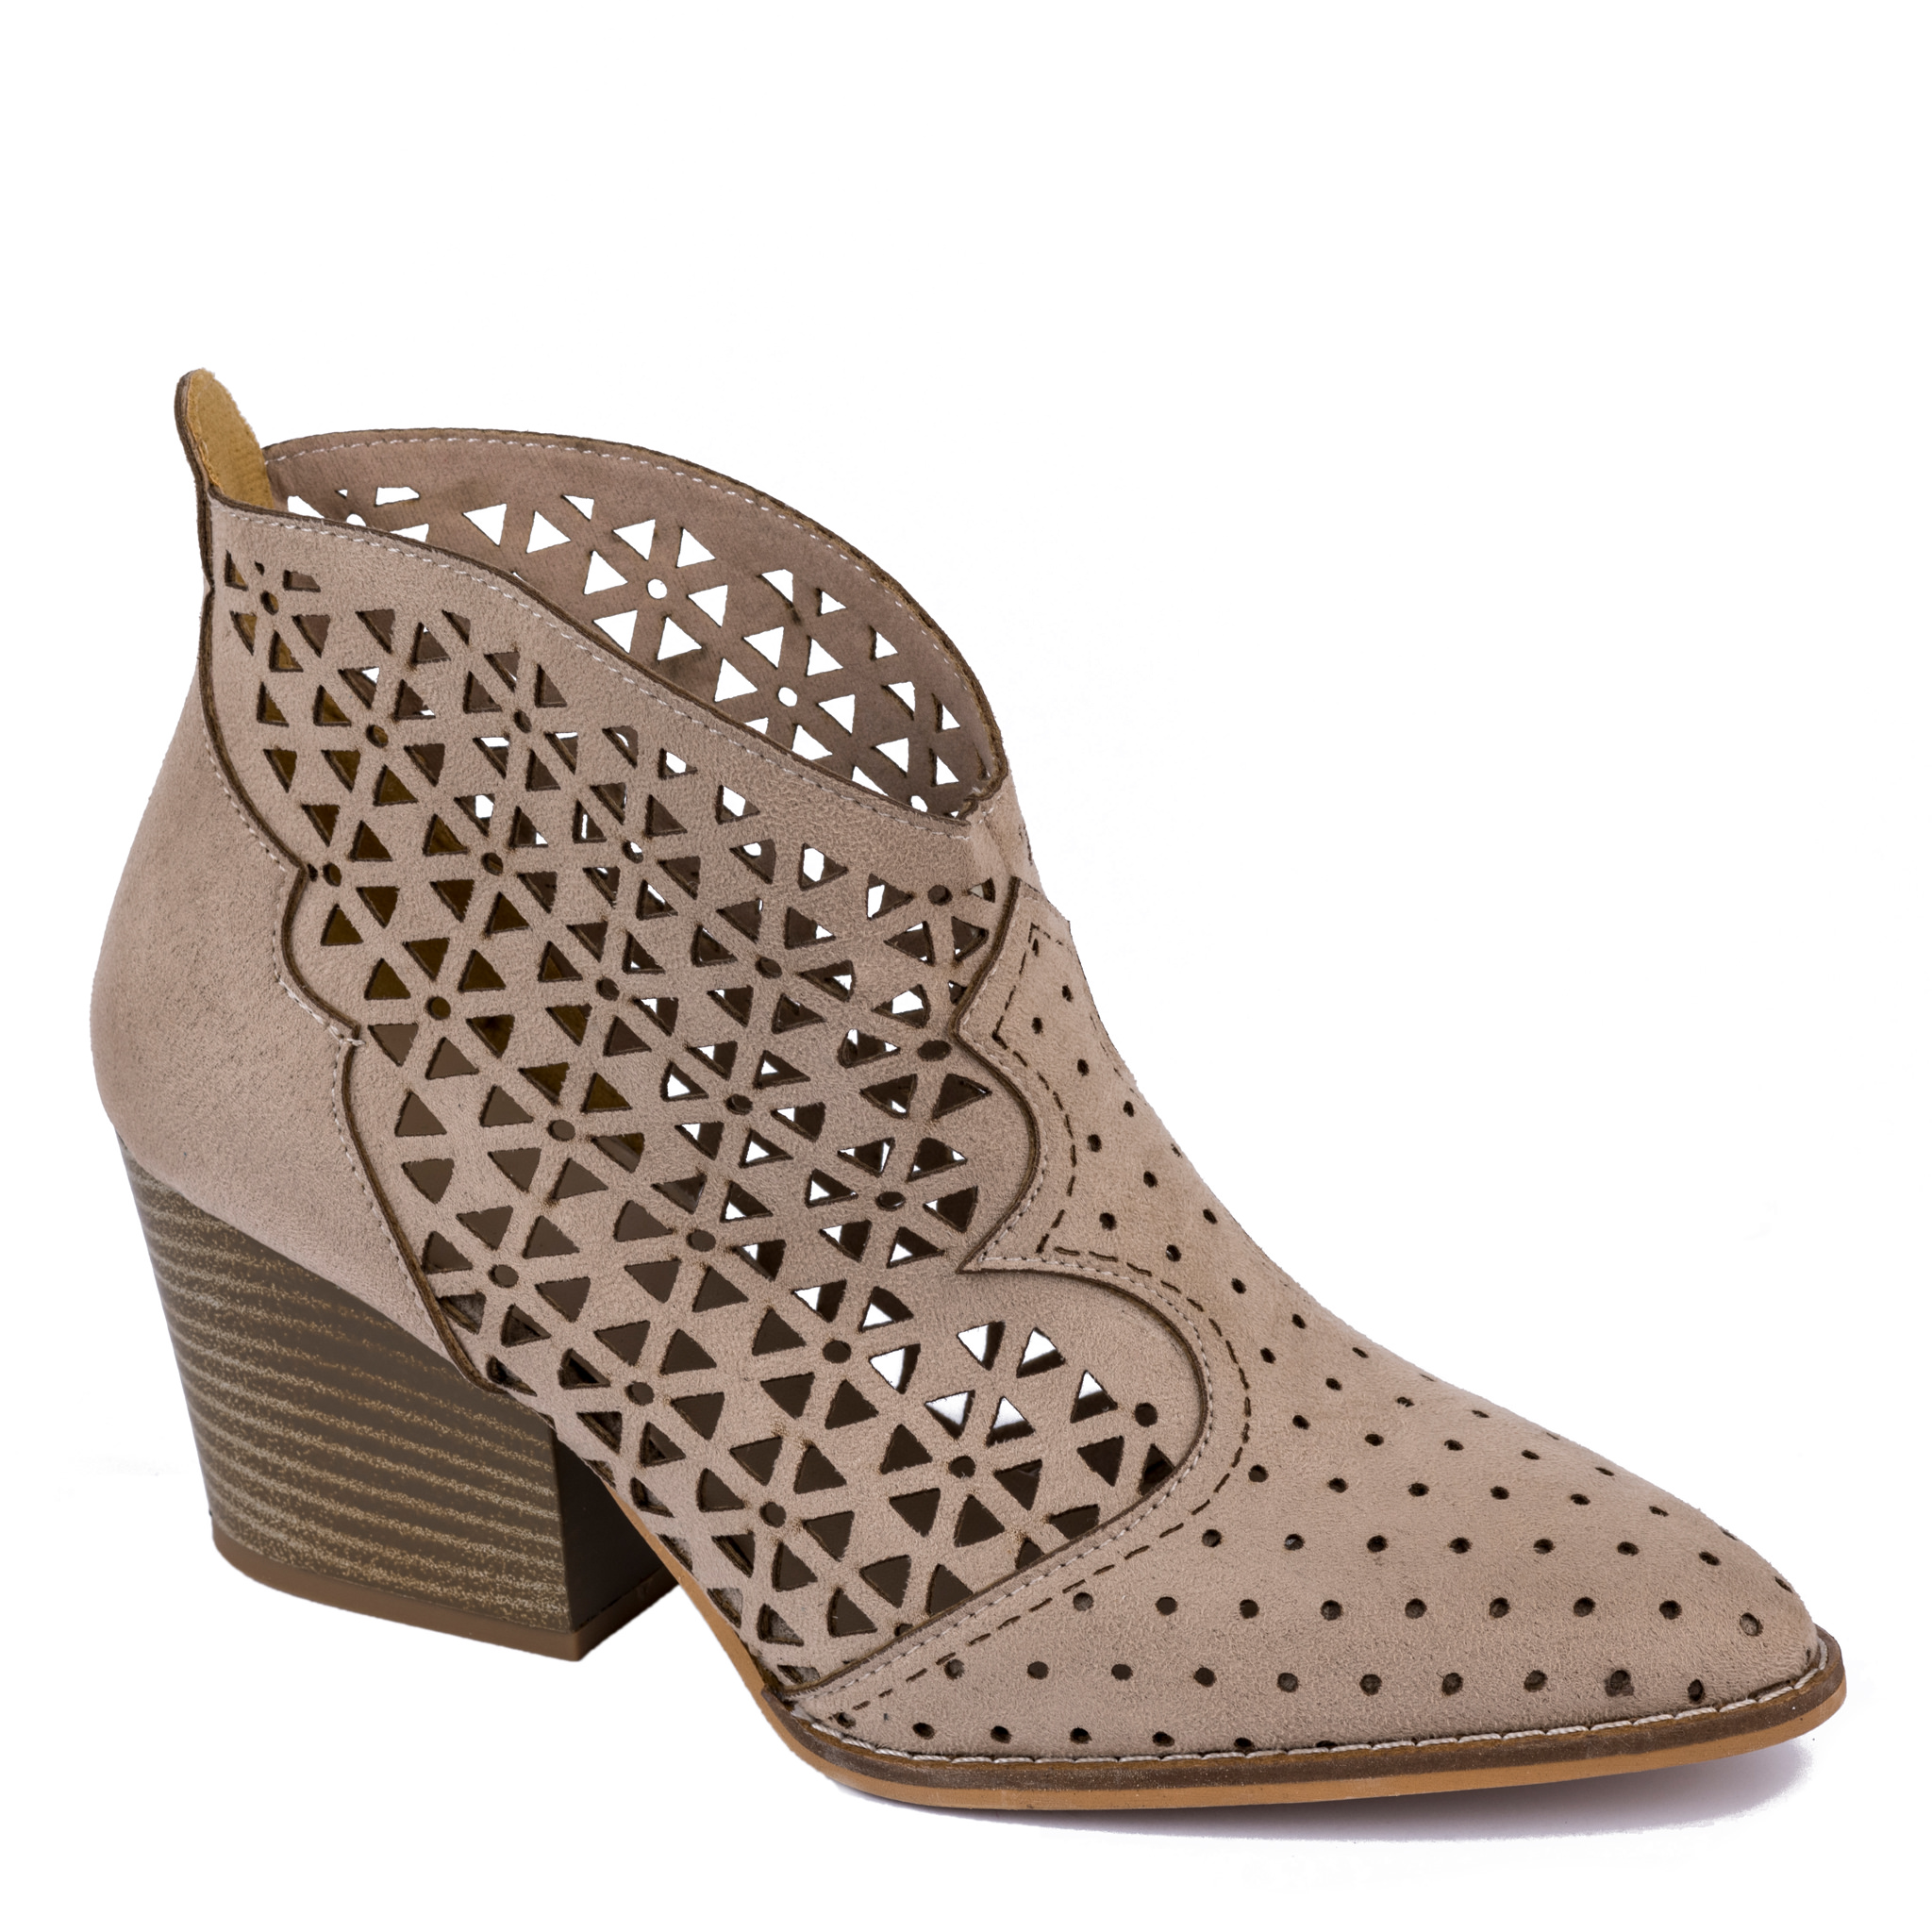 VELOUR THICK HEEL HOLLOW ANKLE BOOTS - BEIGE